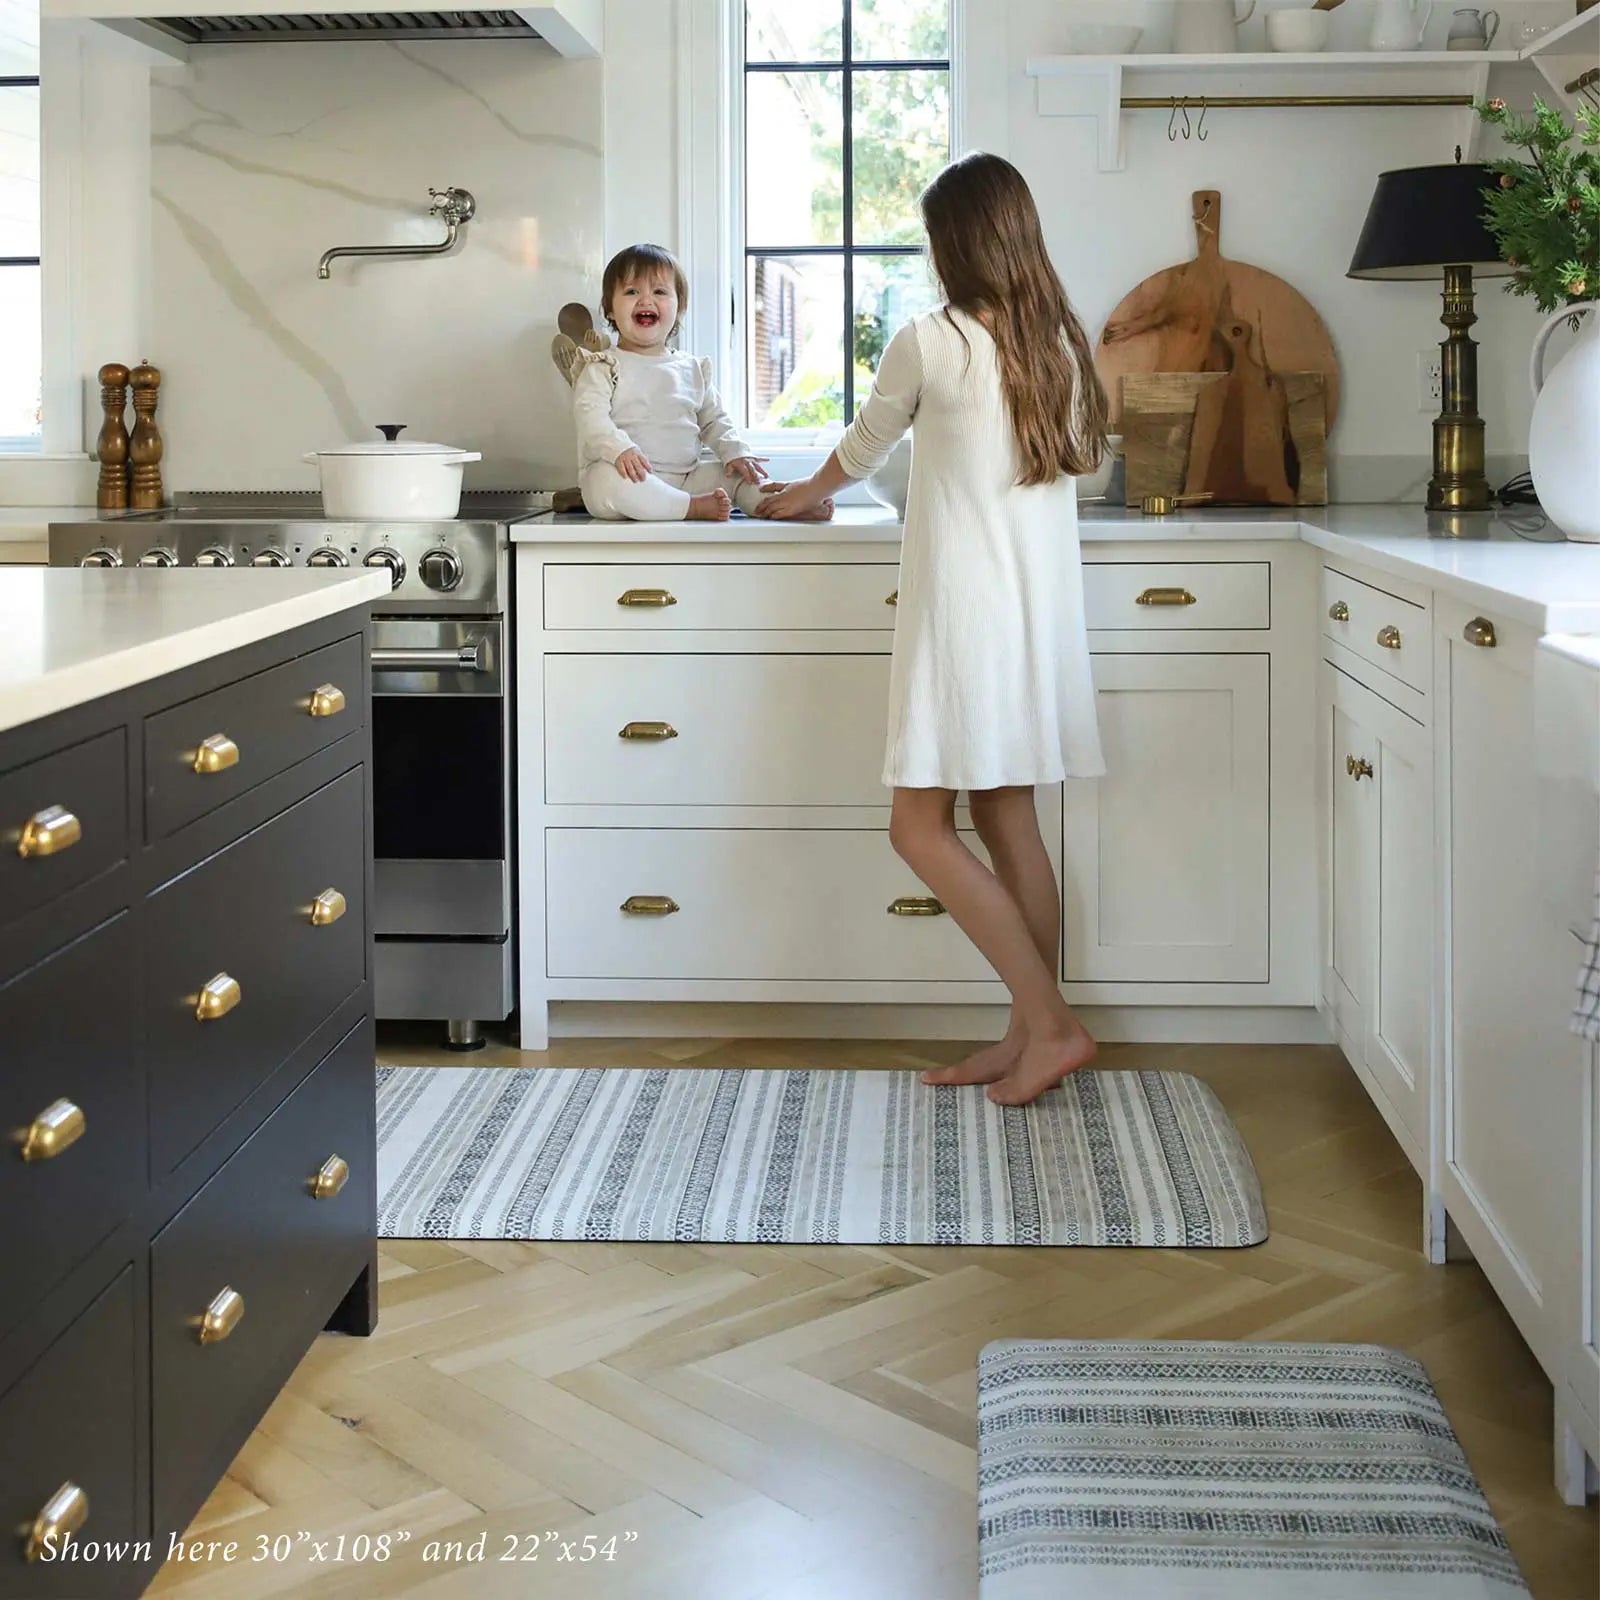 Paloma taupe & white neutral boho stripe kitchen mat shown in kitchen in size 22x54 and 30x108